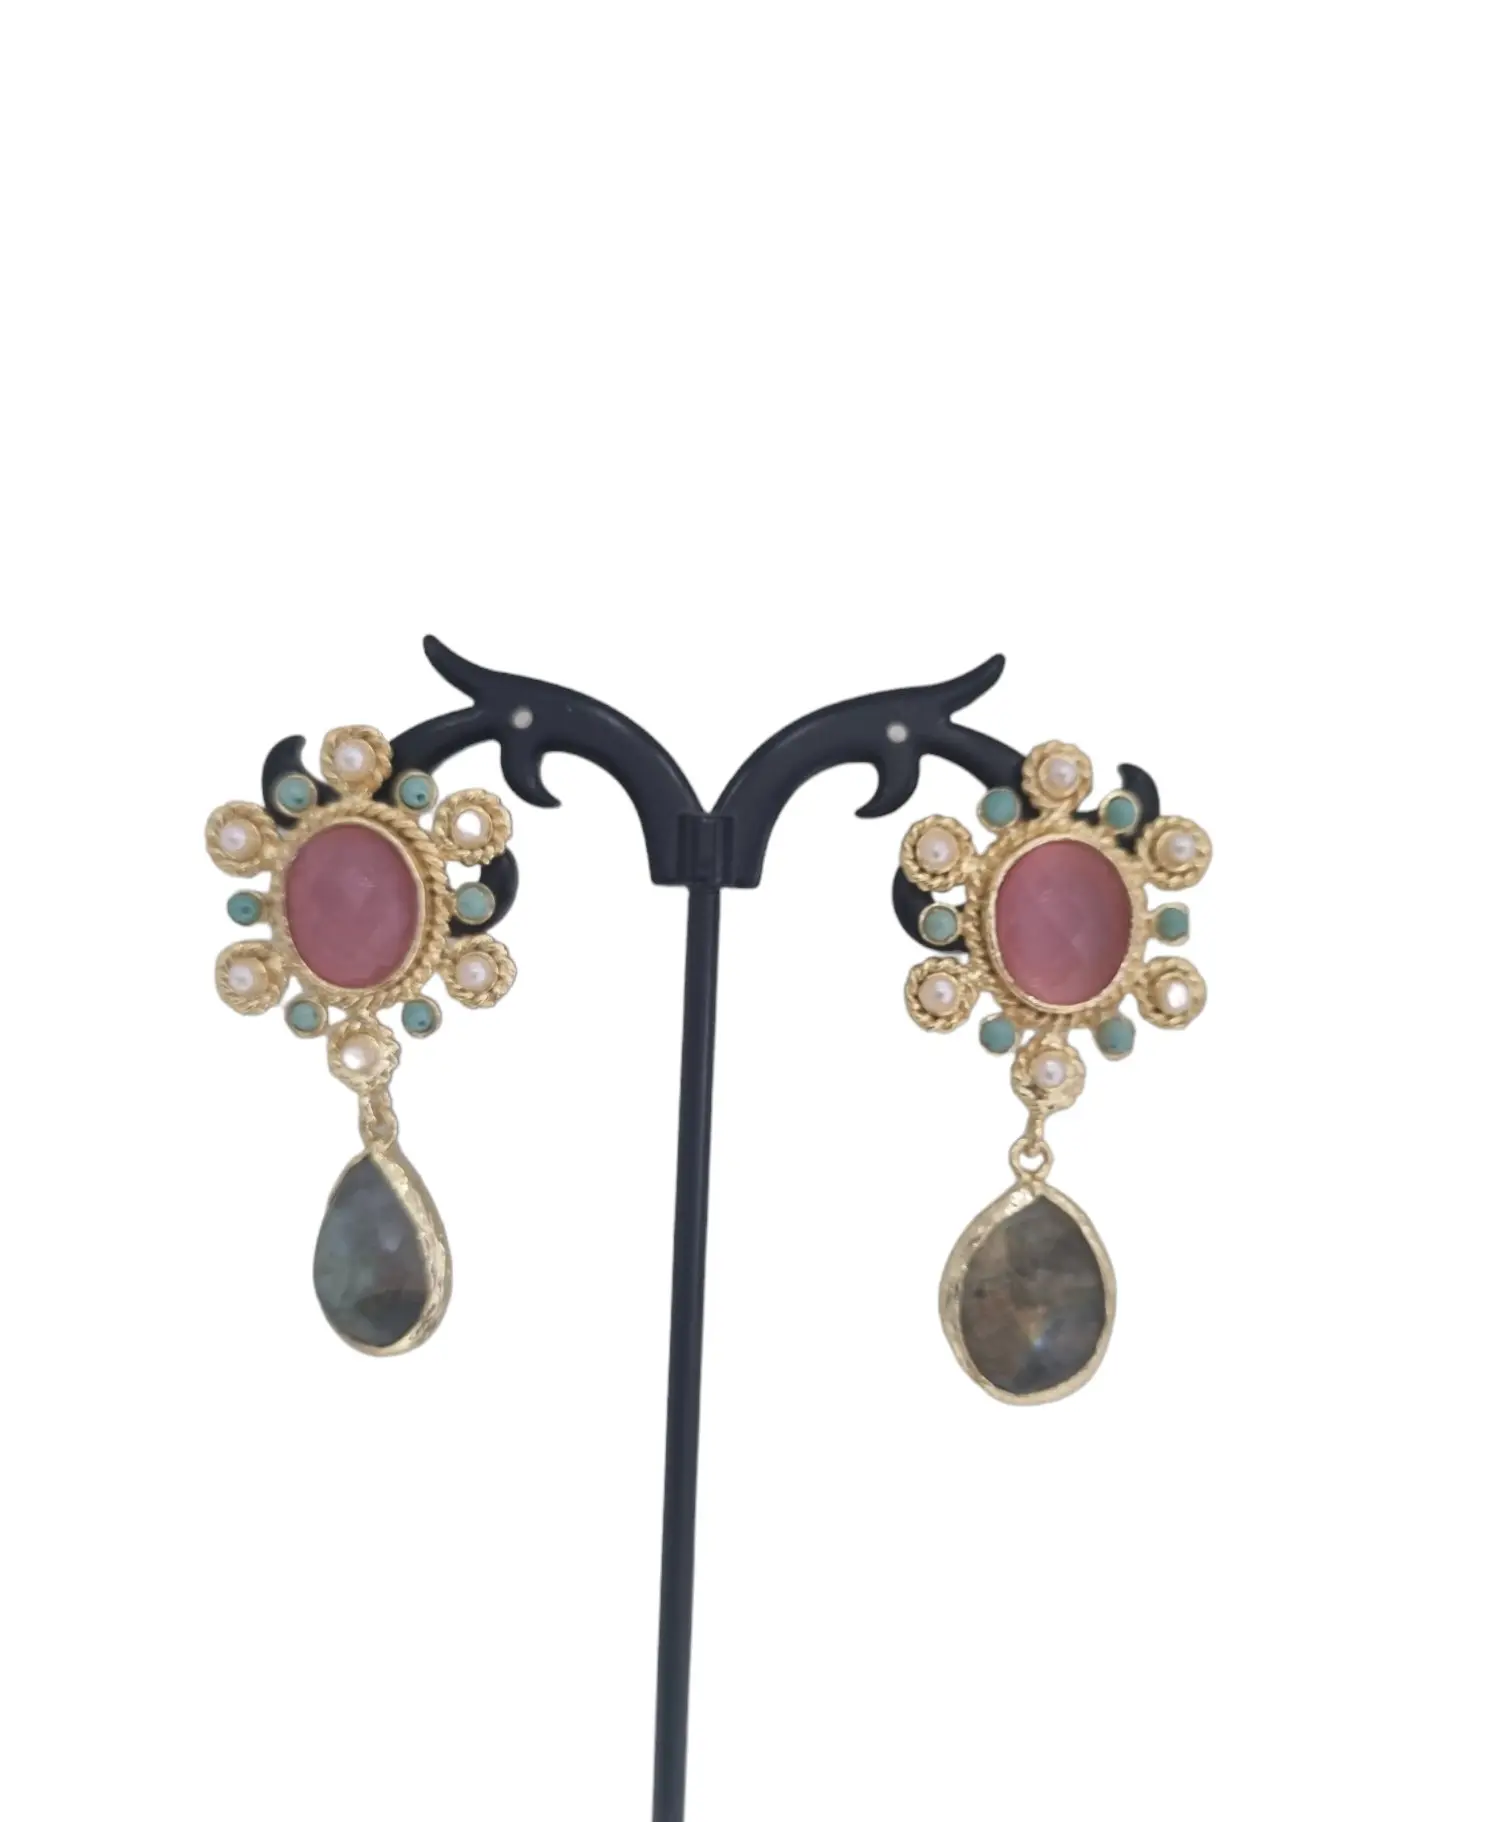 Earrings made with agate, Majorcan pearls, turquoise and labradorite set on brass. Length 4.5cm Weight 7g